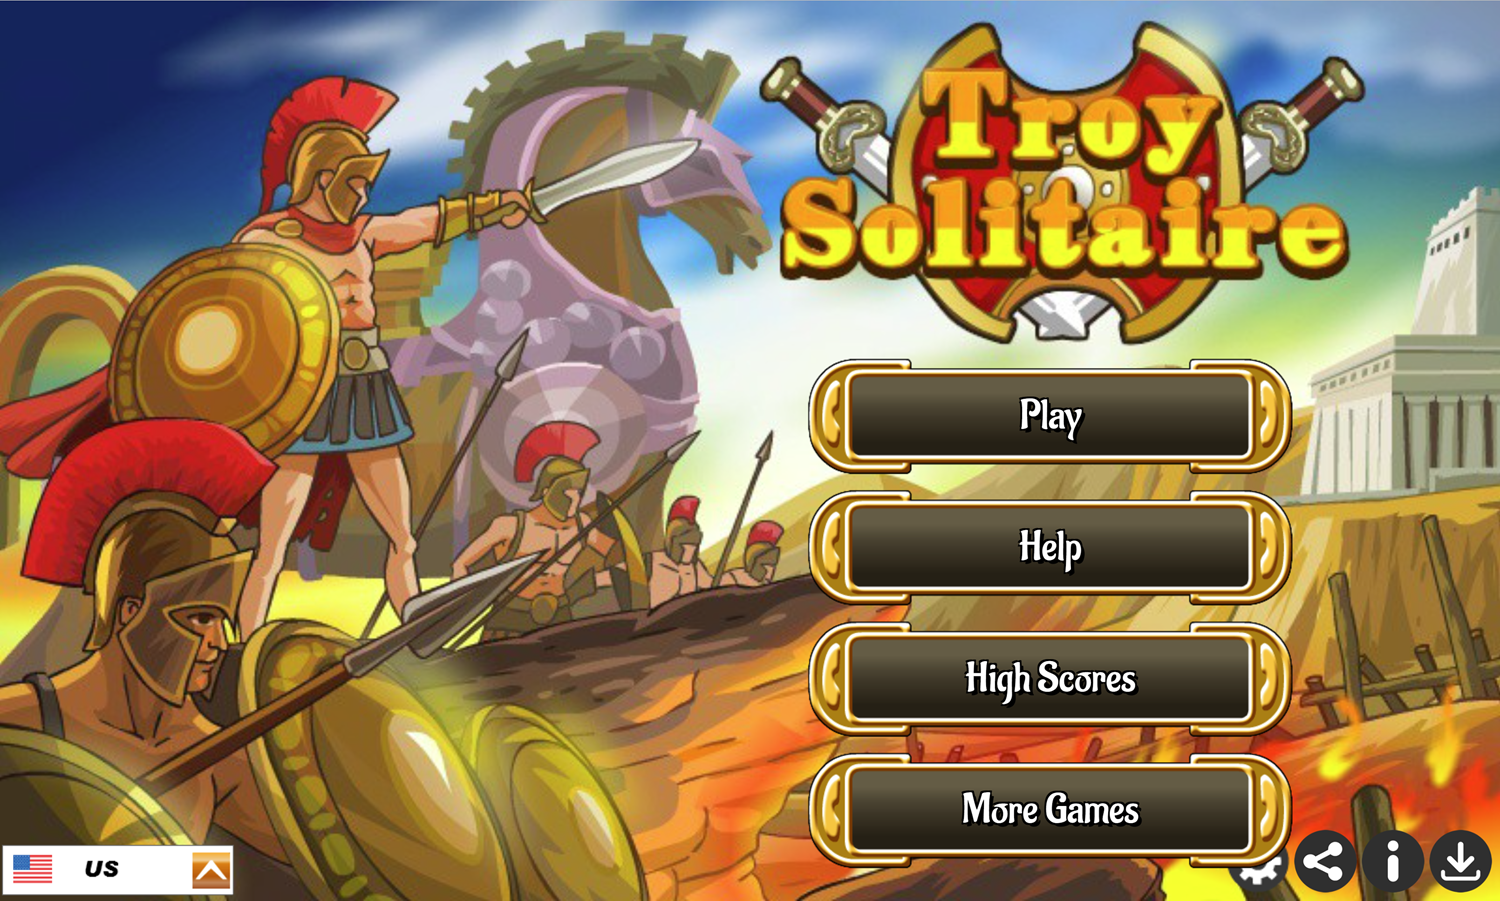 Troy Solitaire Game Welcome Screen Screenshot.